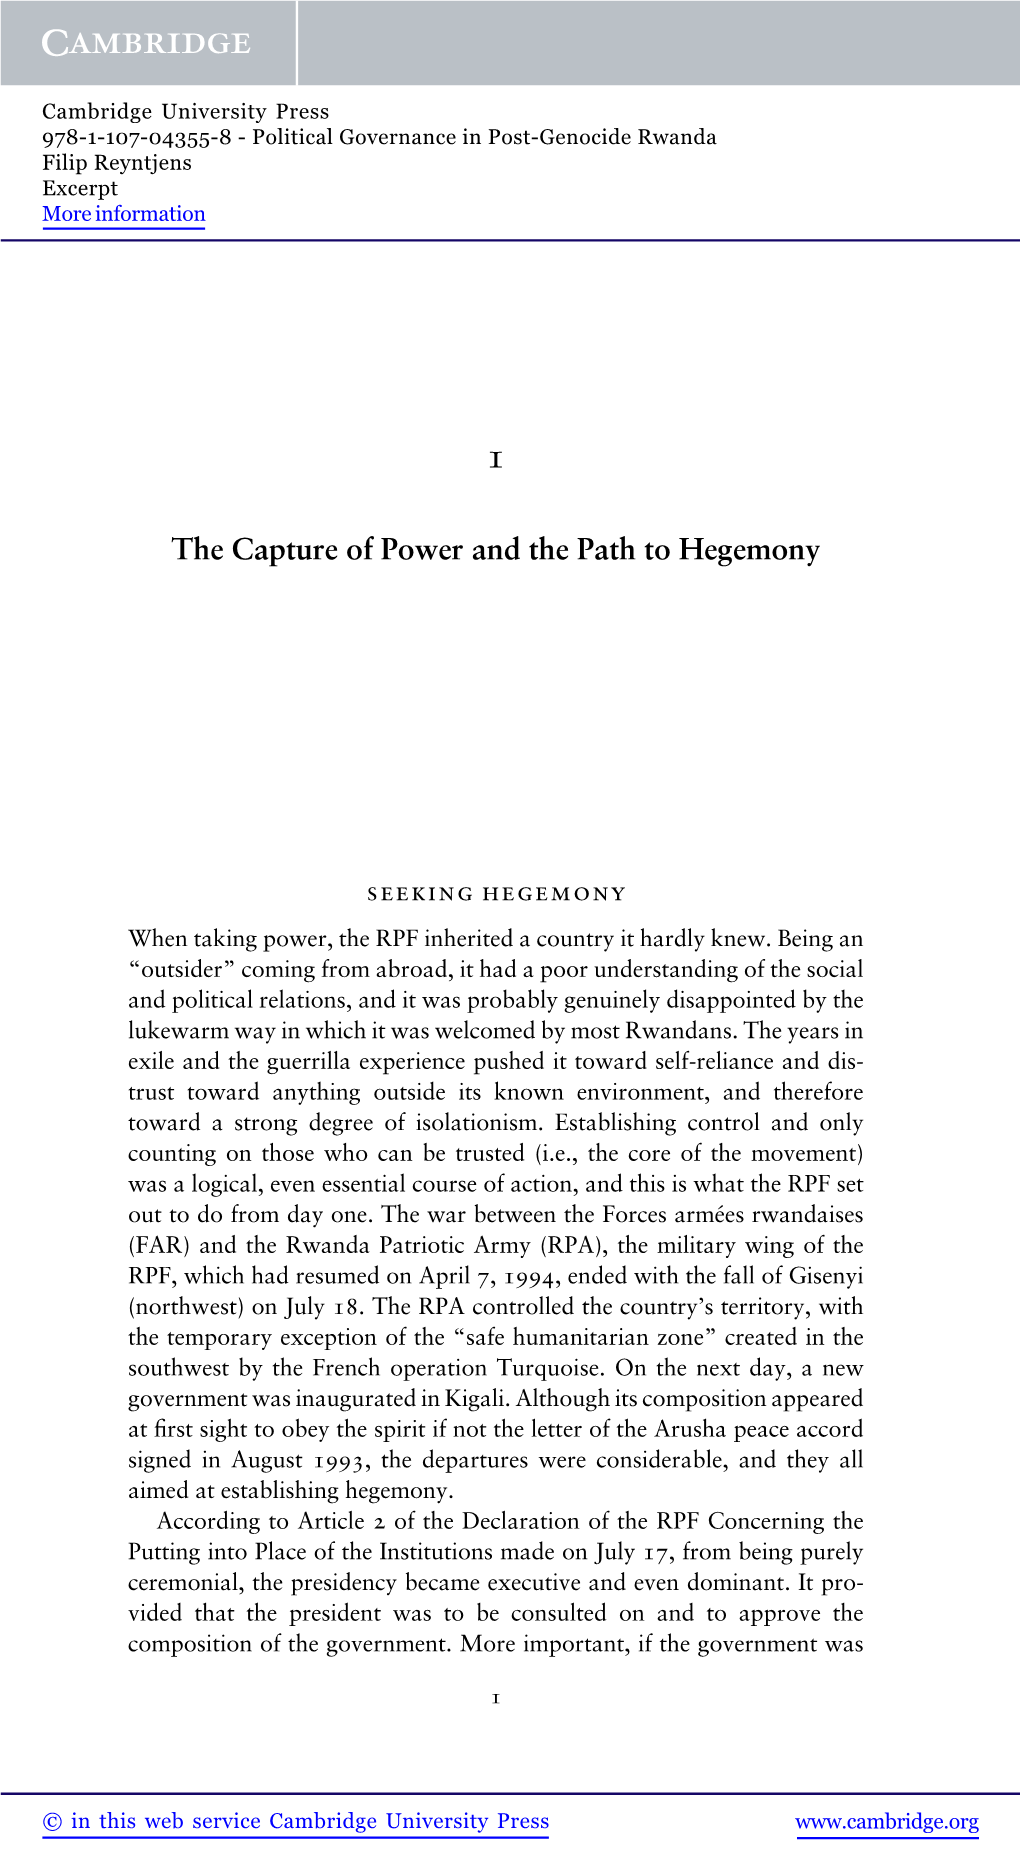 The Capture of Power and the Path to Hegemony